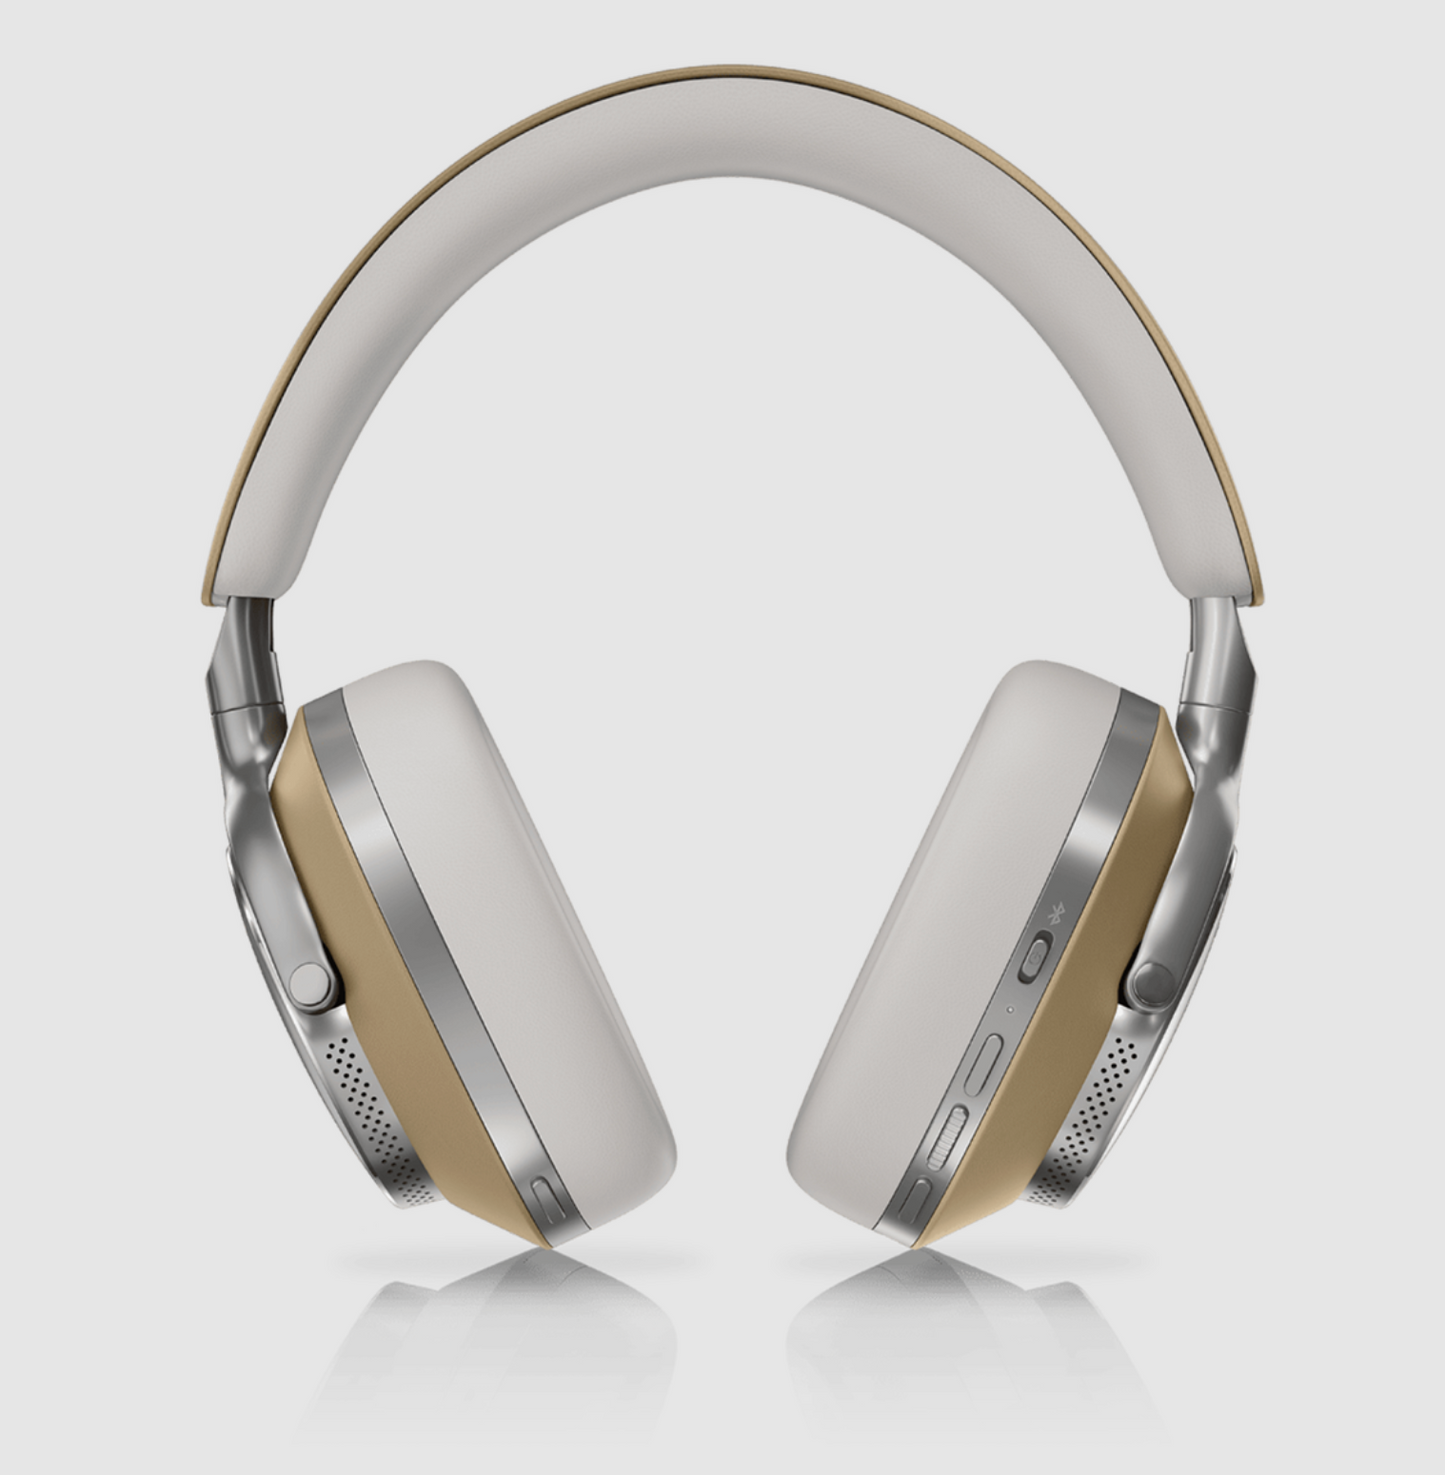 B&W Px8 Noise Cancelling Headphones in Tan. Image of controls